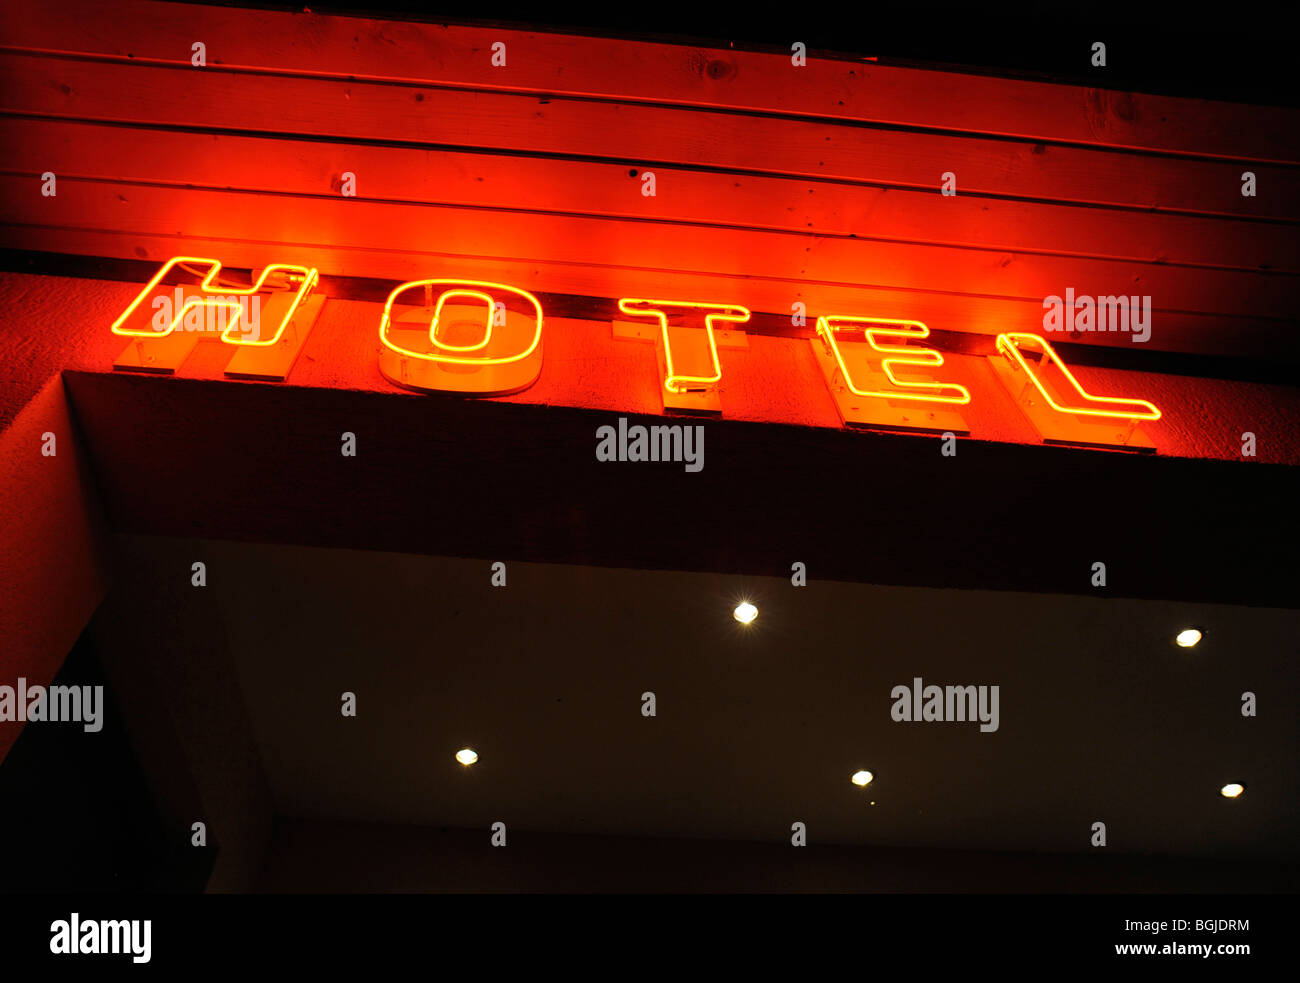 Hotel sign Stock Photo